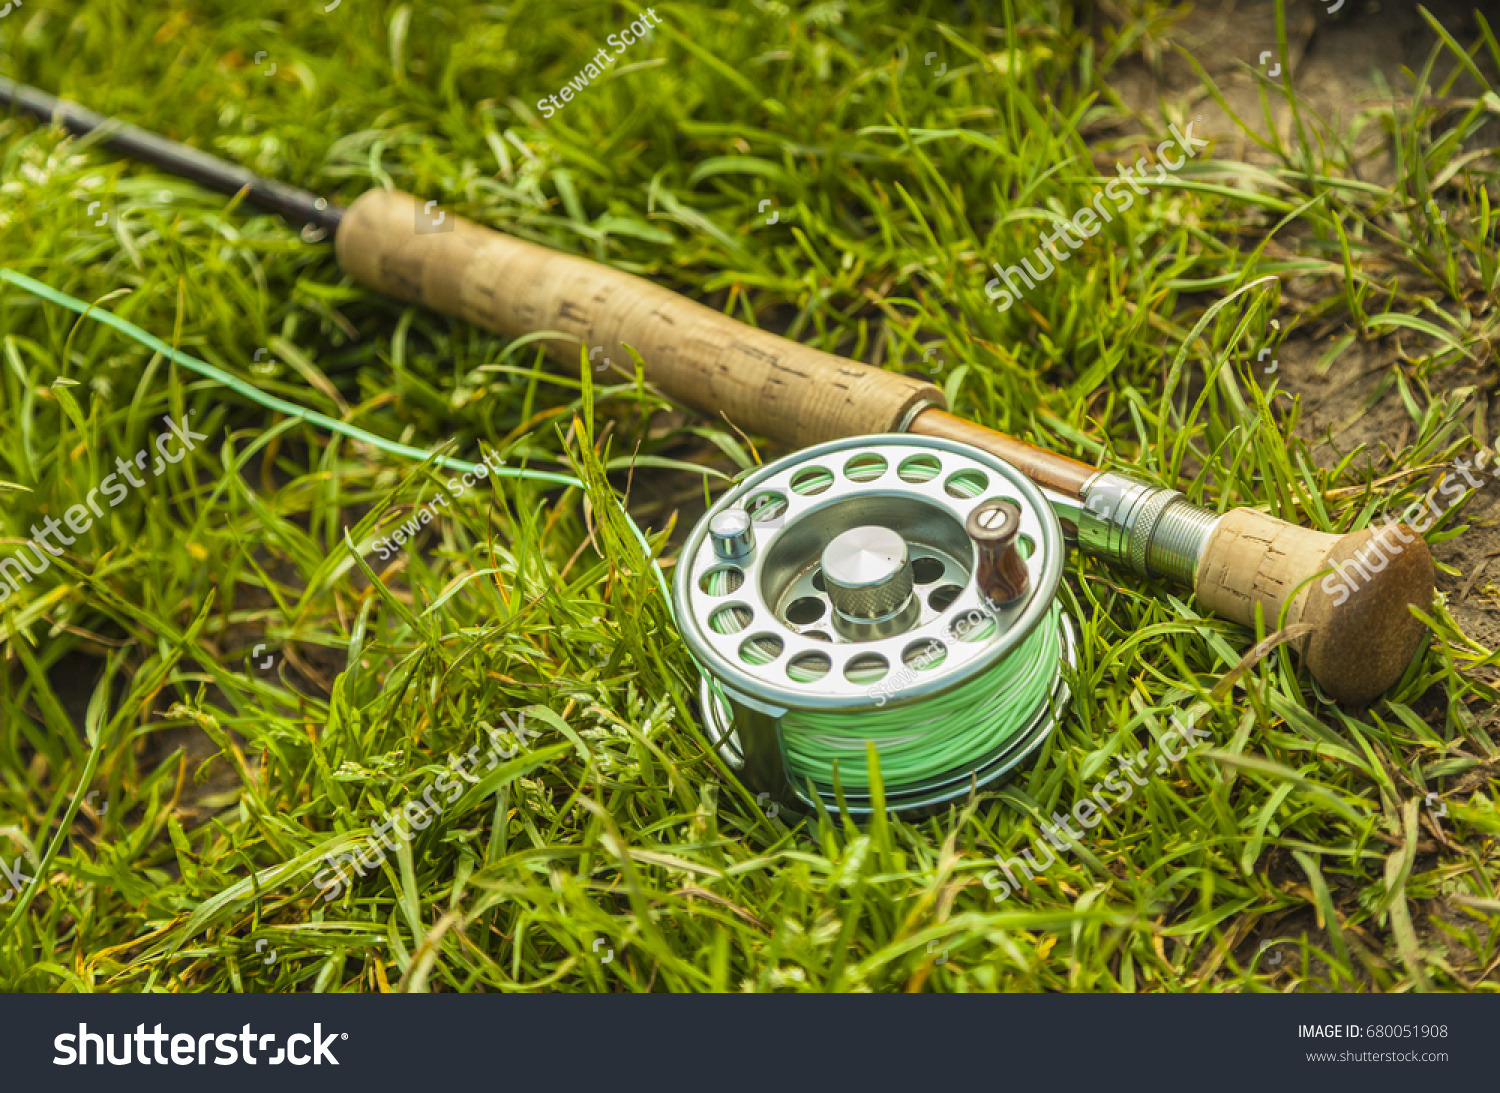 https://image.shutterstock.com/z/stock-photo-a-fly-fishing-rod-and-reel-lays-on-the-grass-ready-to-be-used-ideal-space-for-copy-and-suitable-680051908.jpg